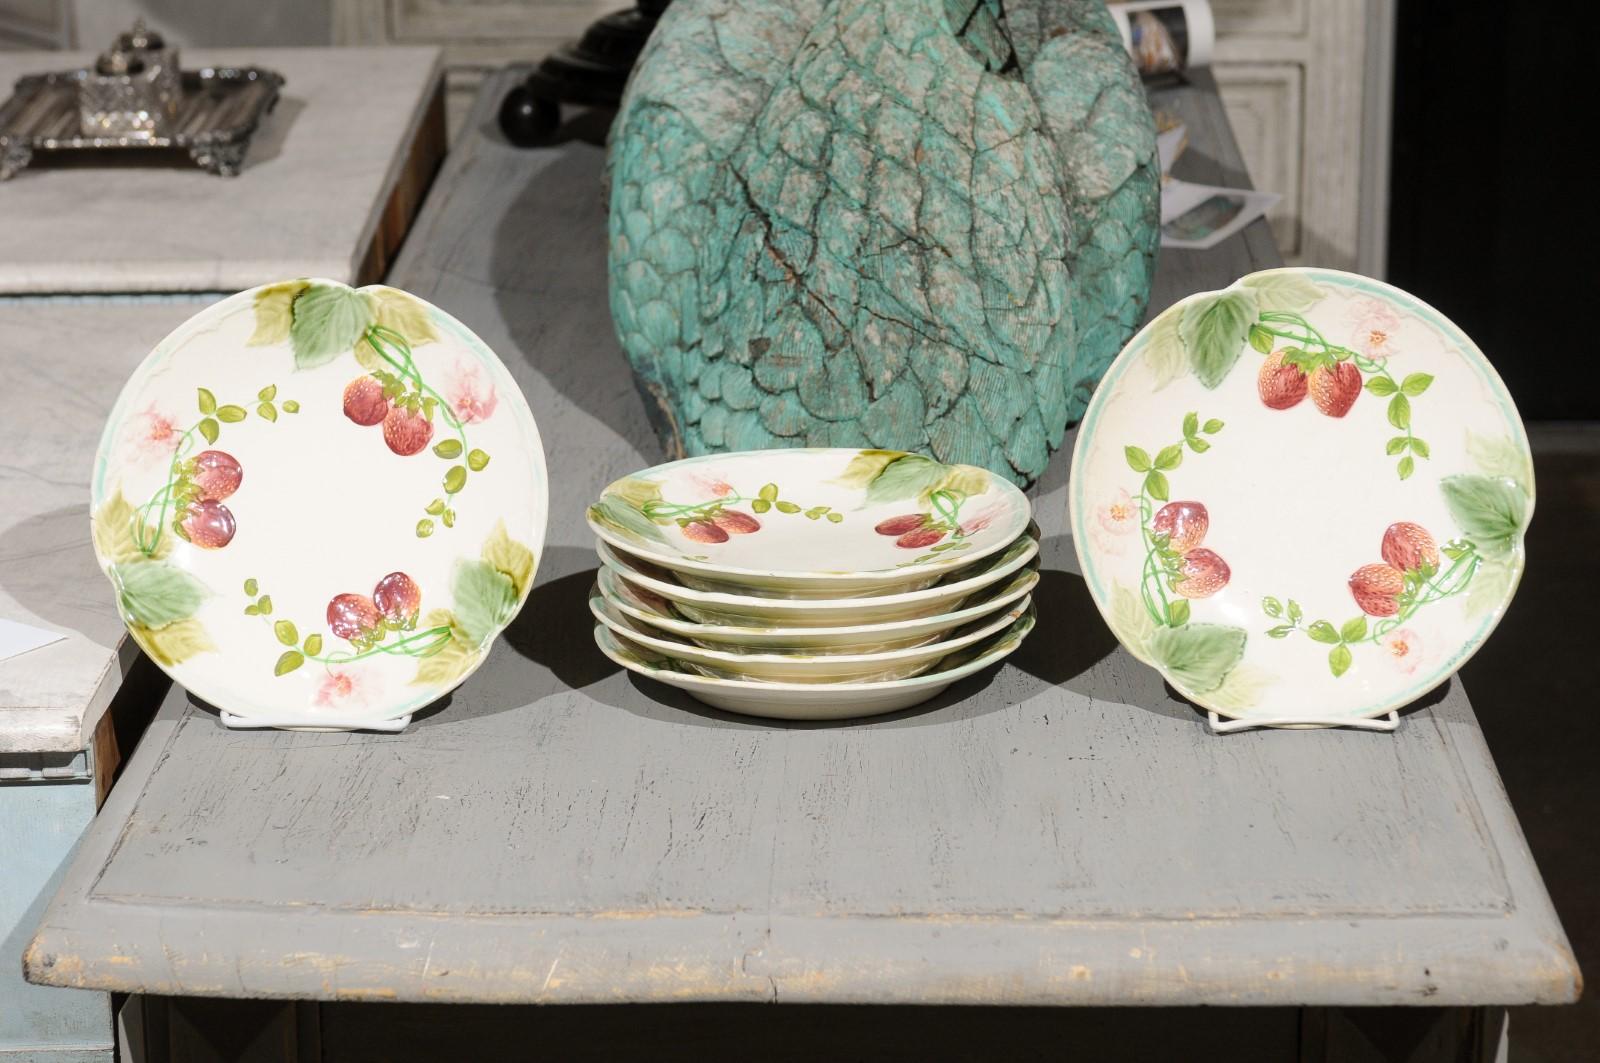 Seven French Choisy-le-Roi Majolica strawberry plates from the second half of the 19th century, priced and sold individually. Charming our eyes with their lovely decor, each of these Majolica plates were produced in the faience factory of